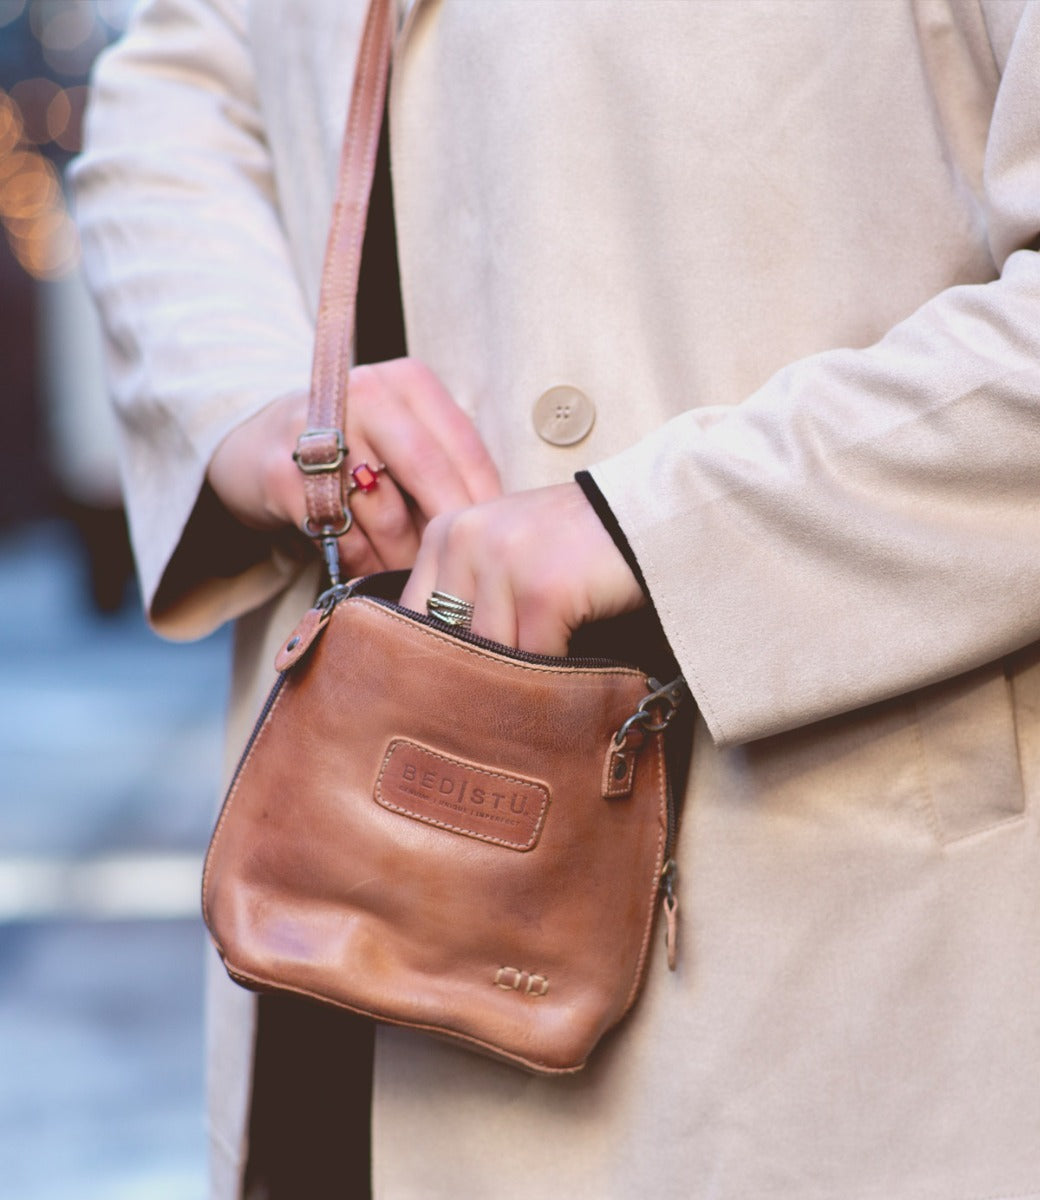 A woman wearing a trench coat holding a Bed Stu Ventura tan leather bag.